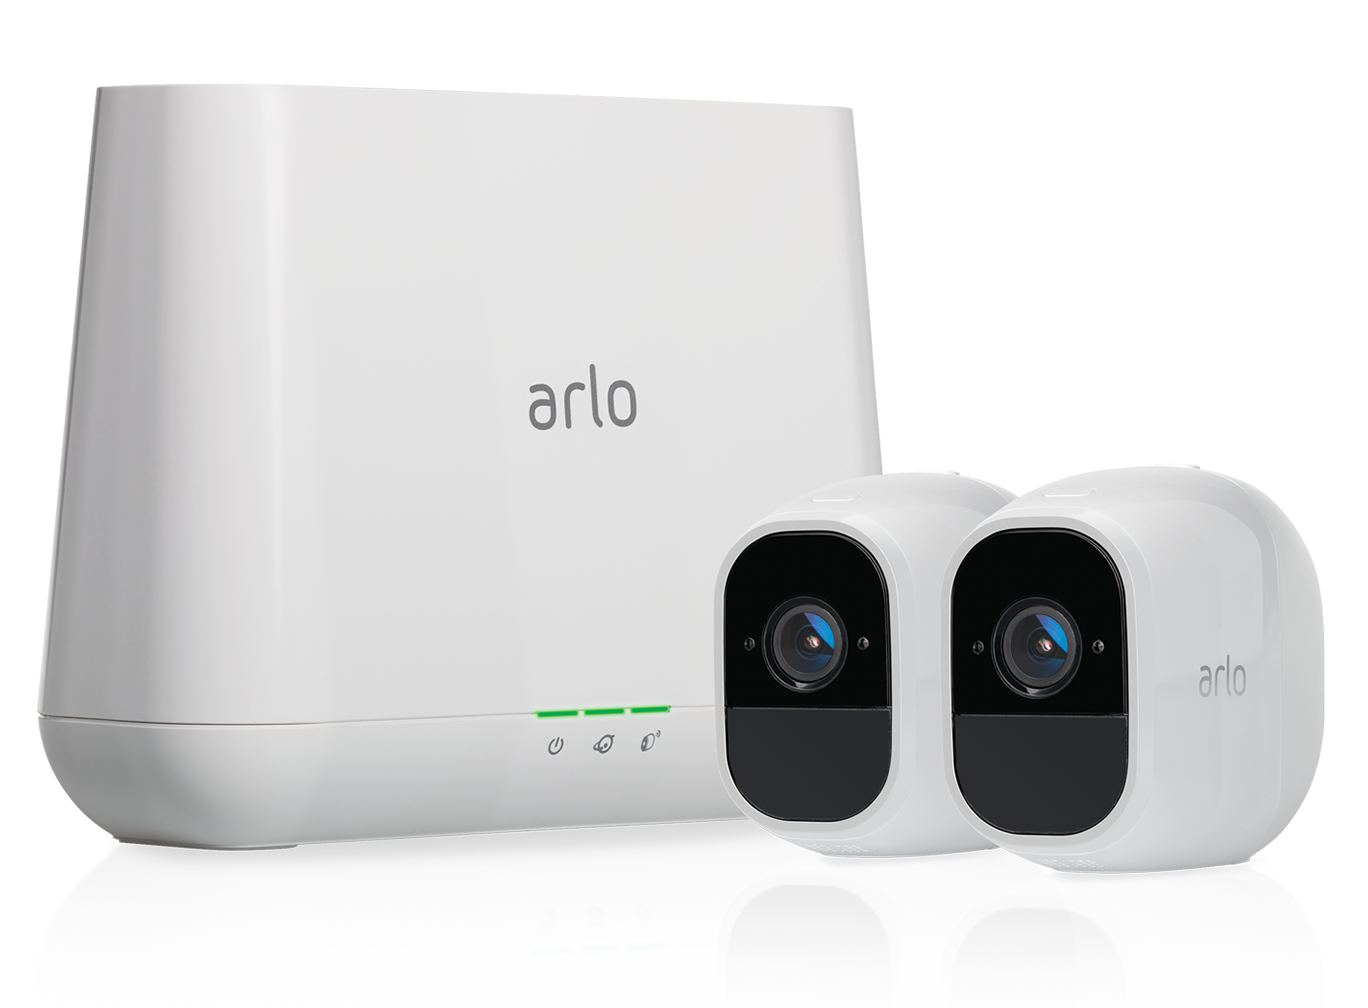 Arlo And Arlo Pro Differences: Choose Your Best Fit